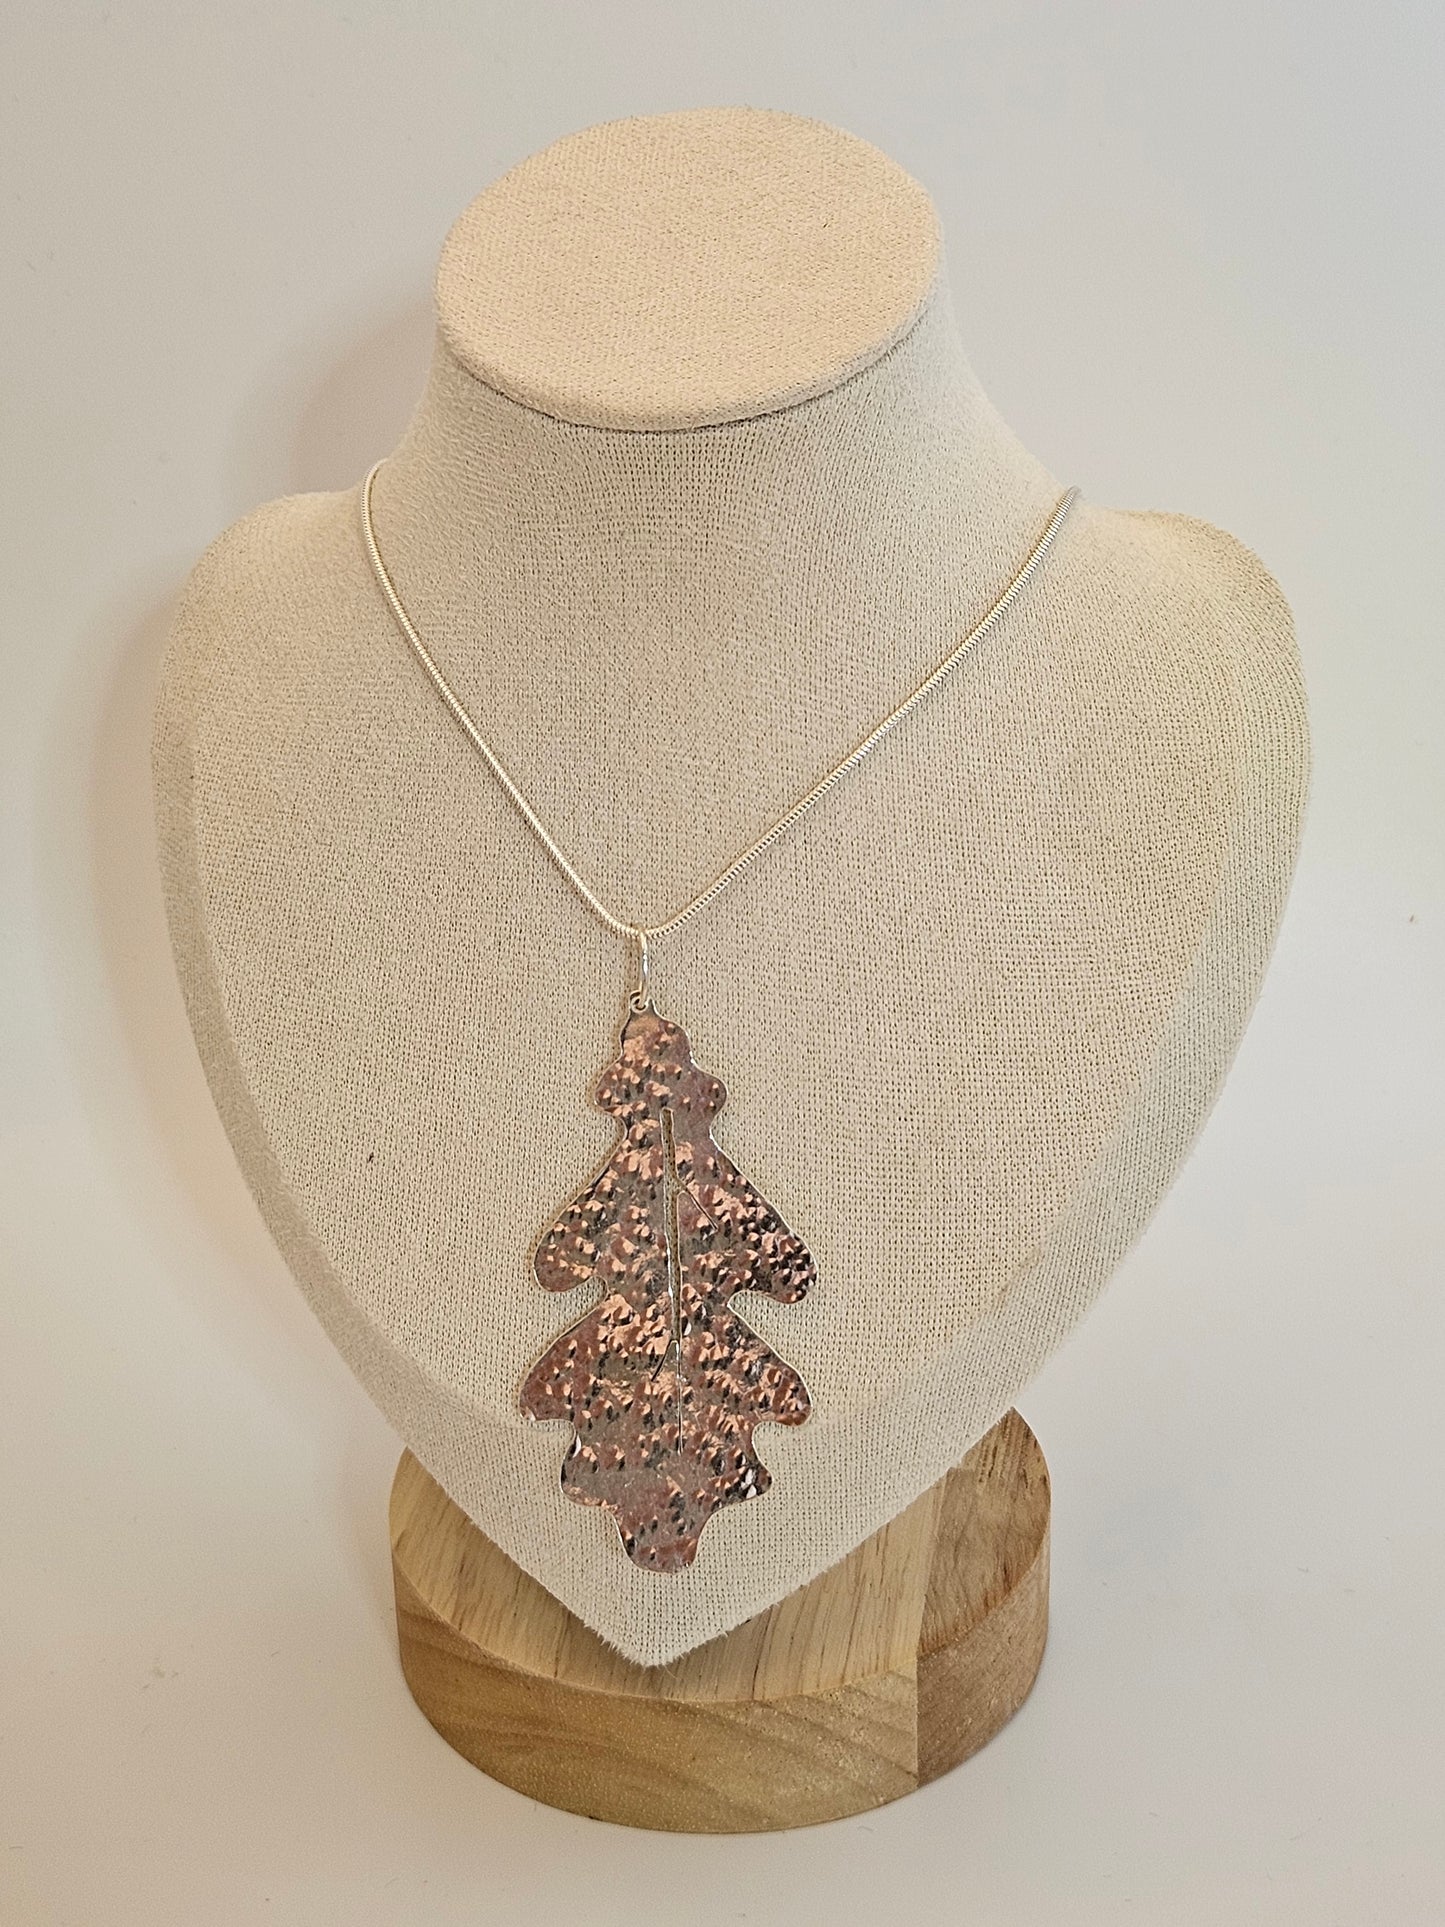 Inspired by Nature Large Oak Leaf